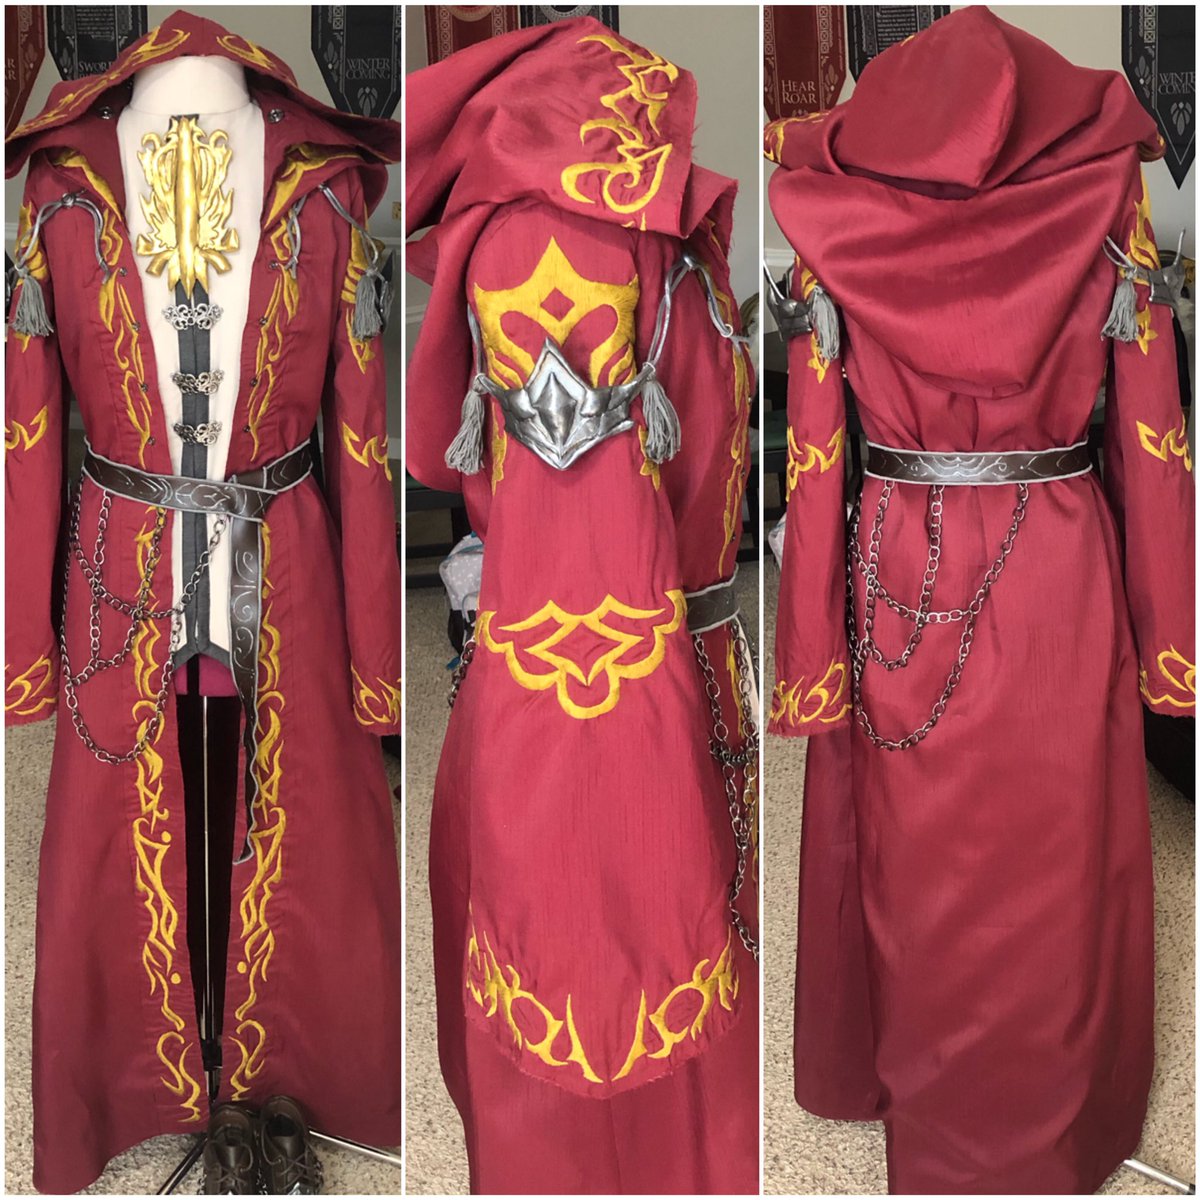 Ehehehe full robe!! I wish I could put the pants on the dressform too but alas, we will just have to imagine all those belts for ourselves.